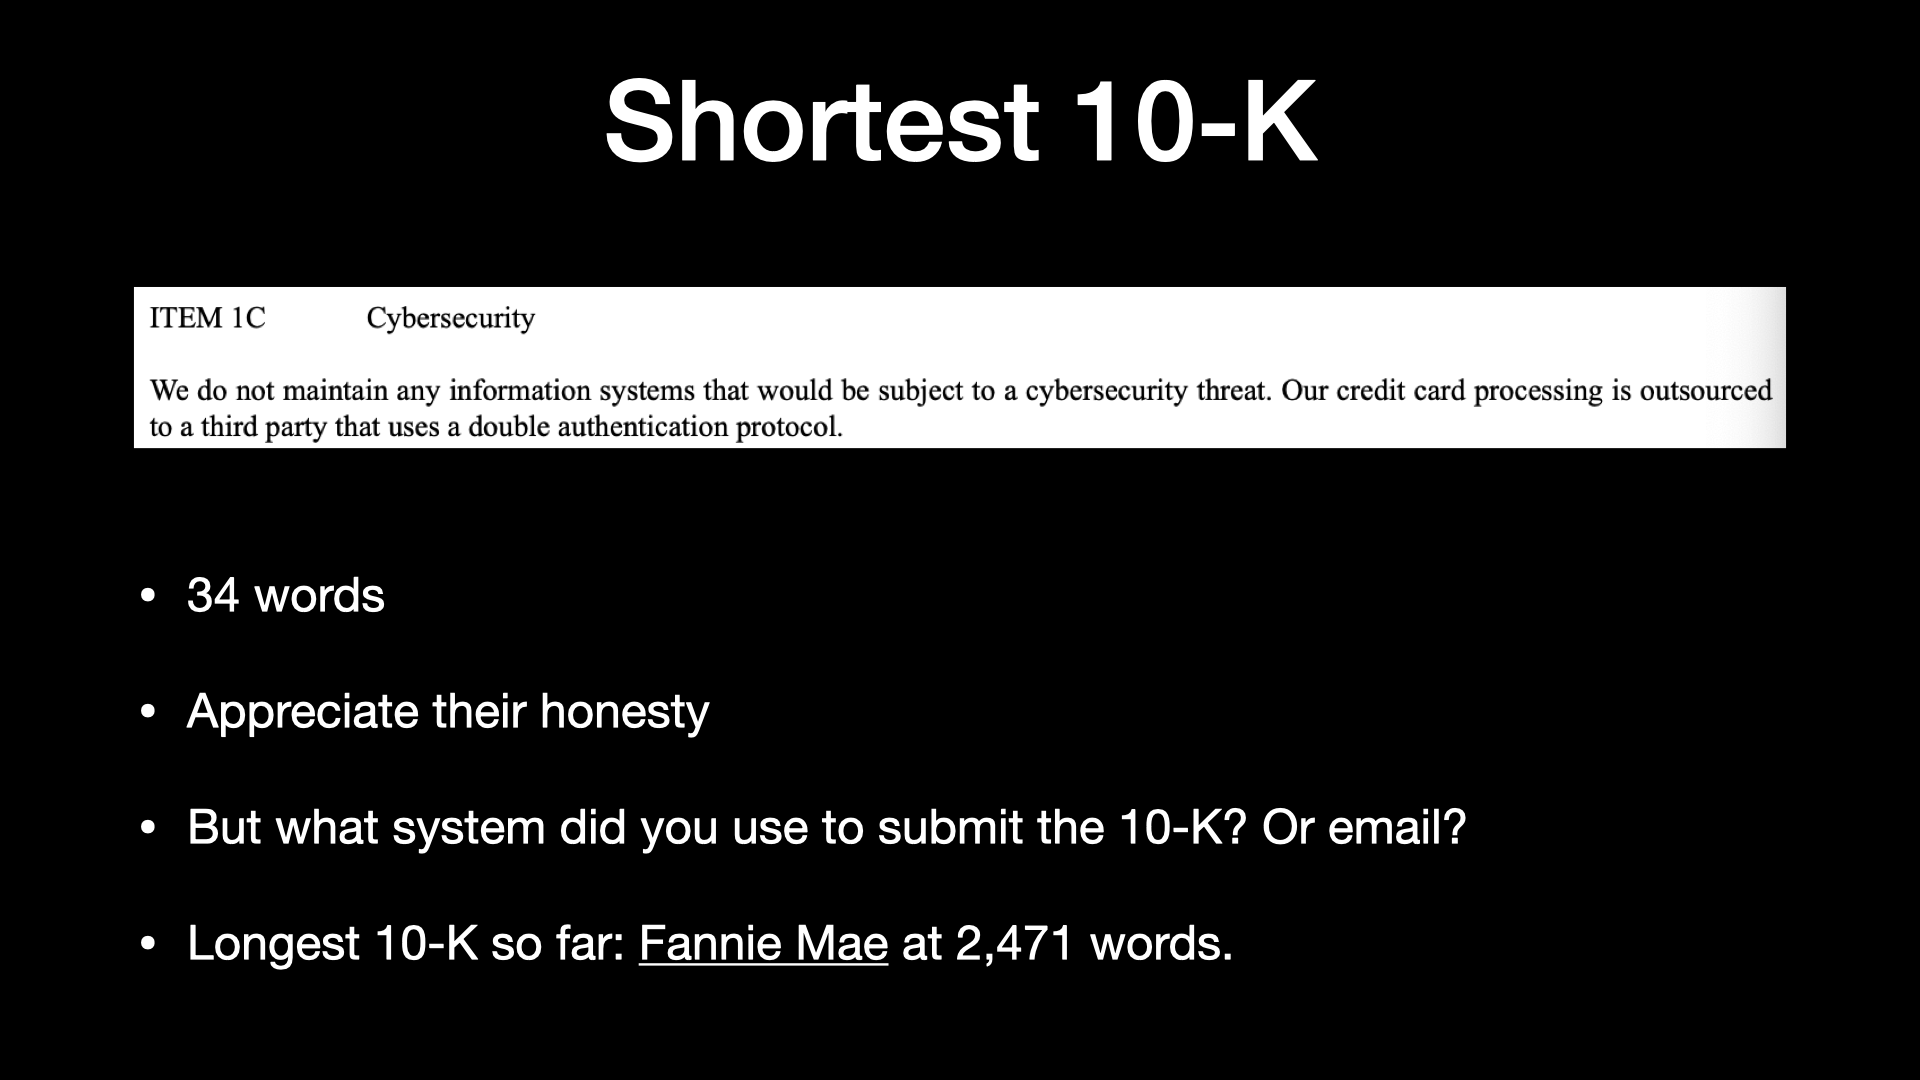 Shortest 10-K ITEM 1C Cybersecurity We do not maintain any information systems that would be subject to a cybersecurity threat. Our credit card processing is outsourced to a third party that uses a double authentication protocol. * 34 words * Appreciate their honesty » But what system did you use to submit the 10-K? Or email? * Longest 10-K so far: Fannie Mae at 2,471 words. 